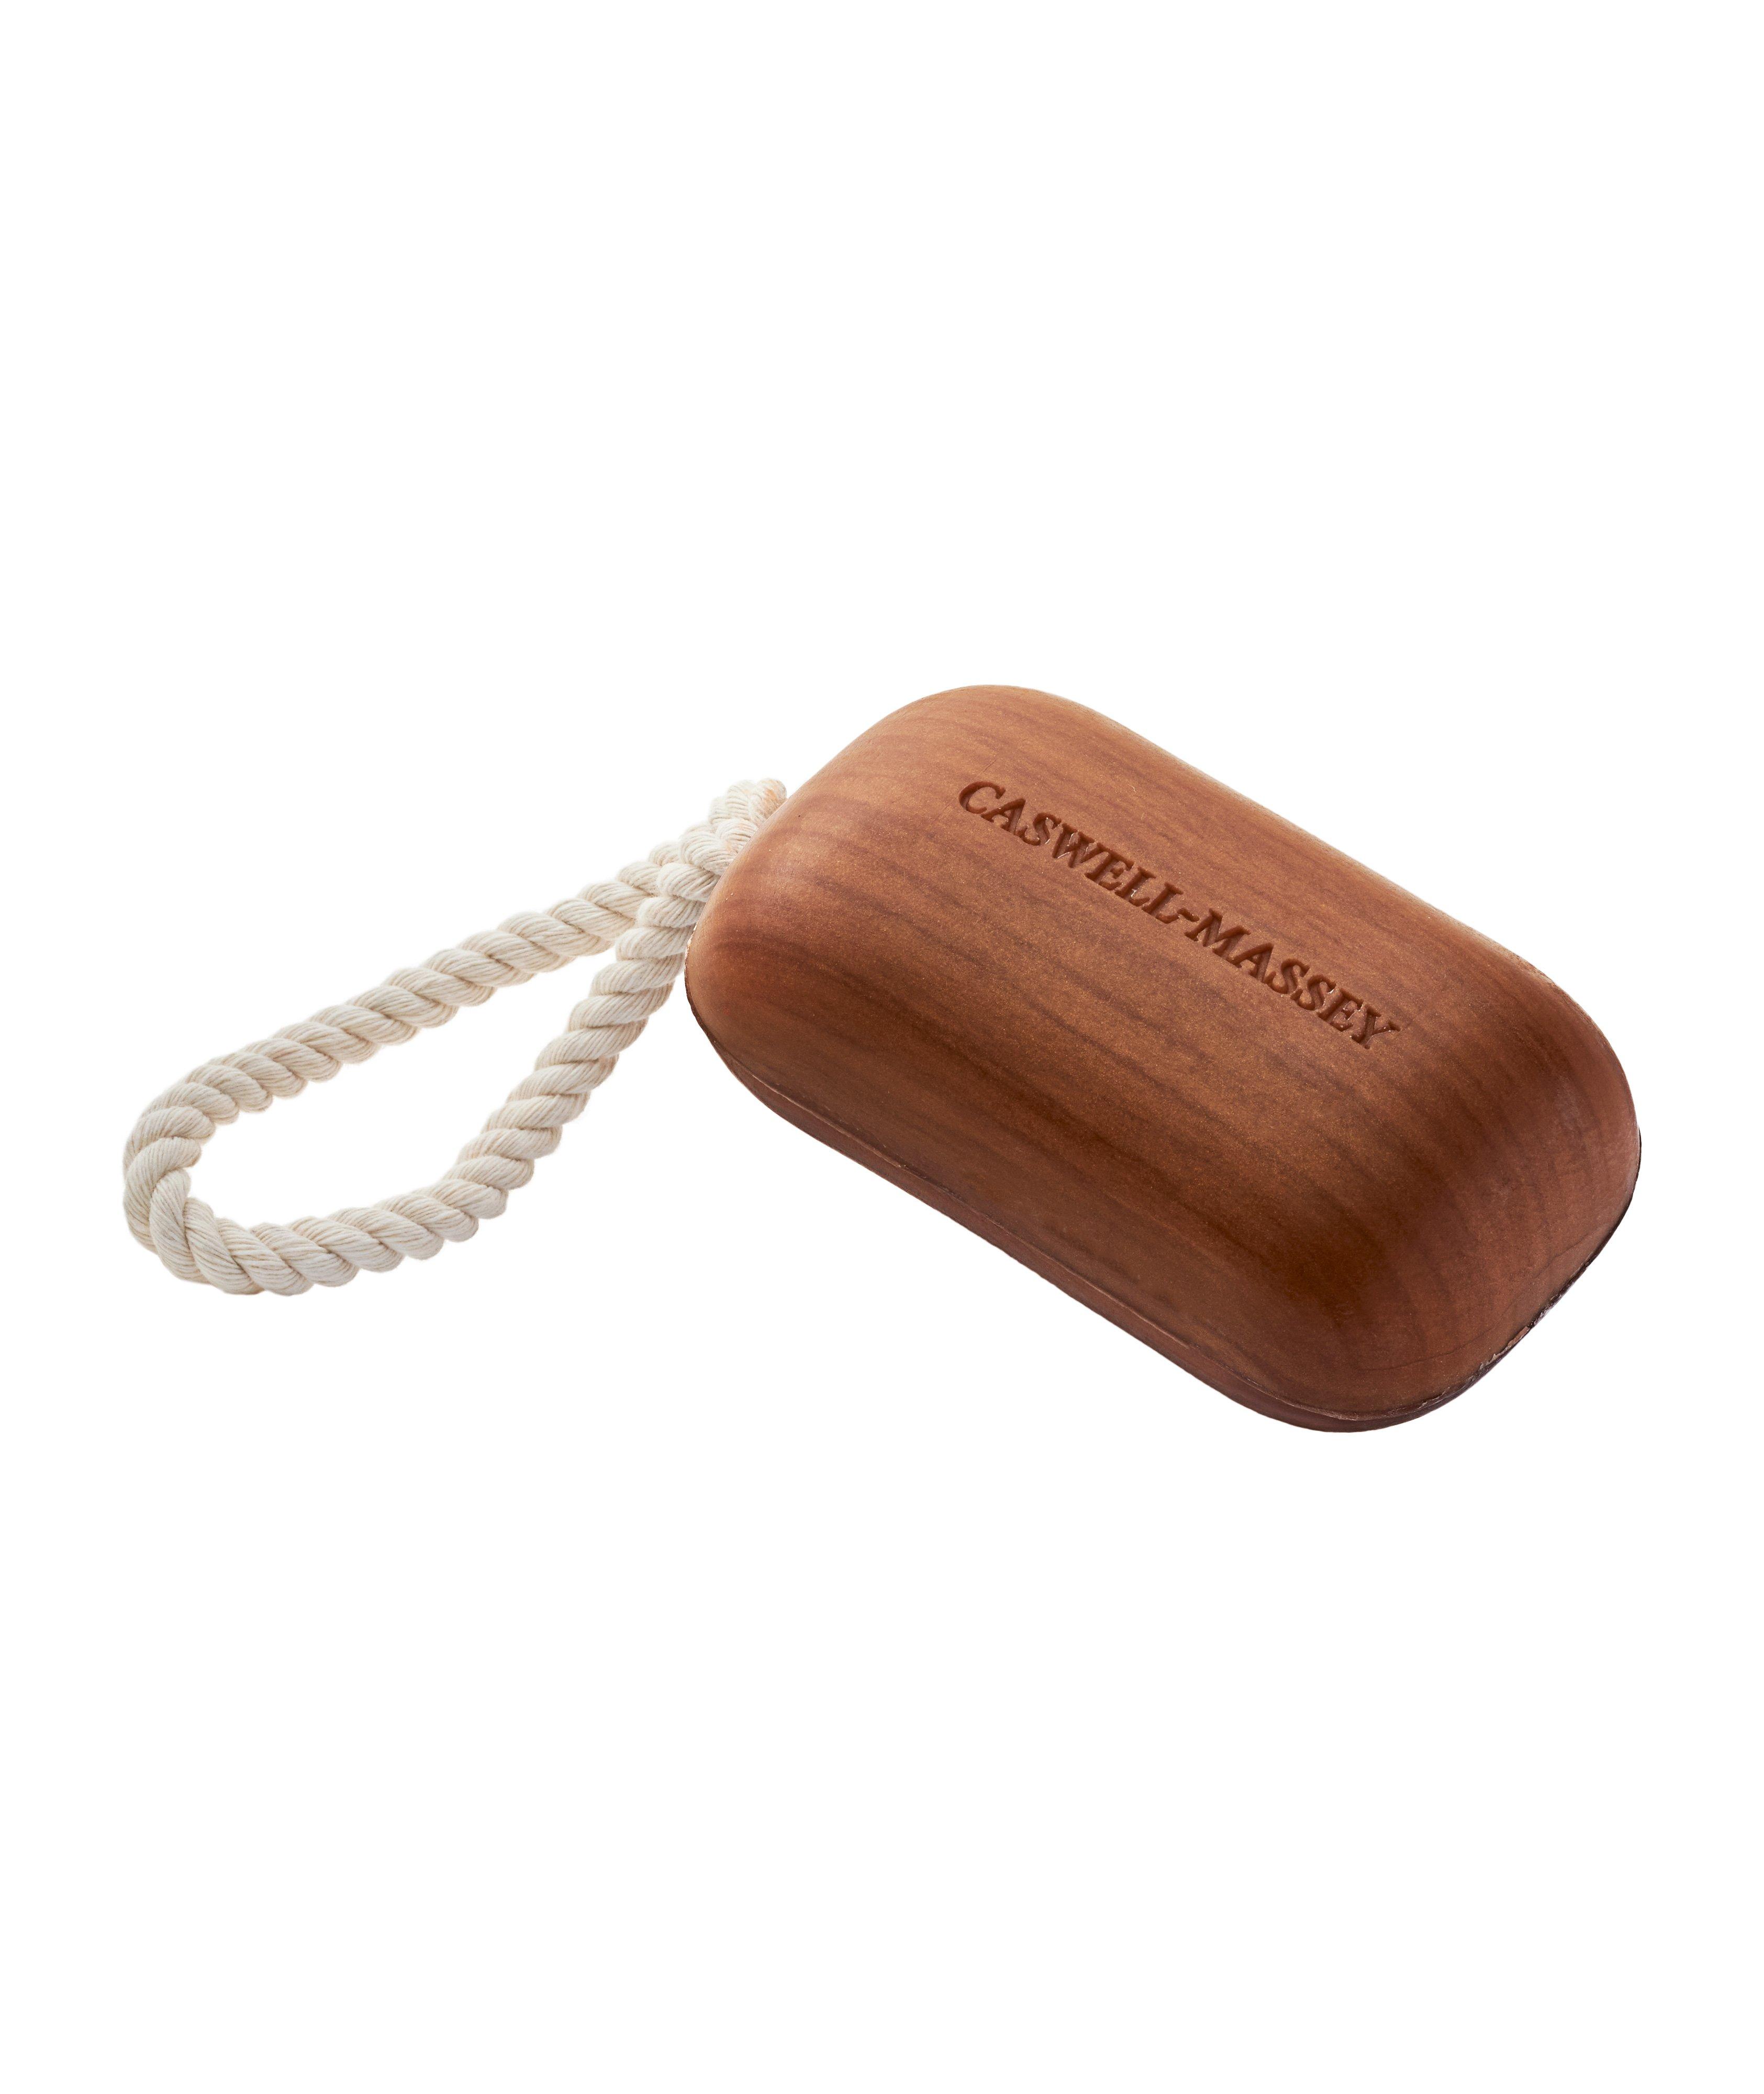 Caswell Massey Sandalwood Soap on a Rope image 0